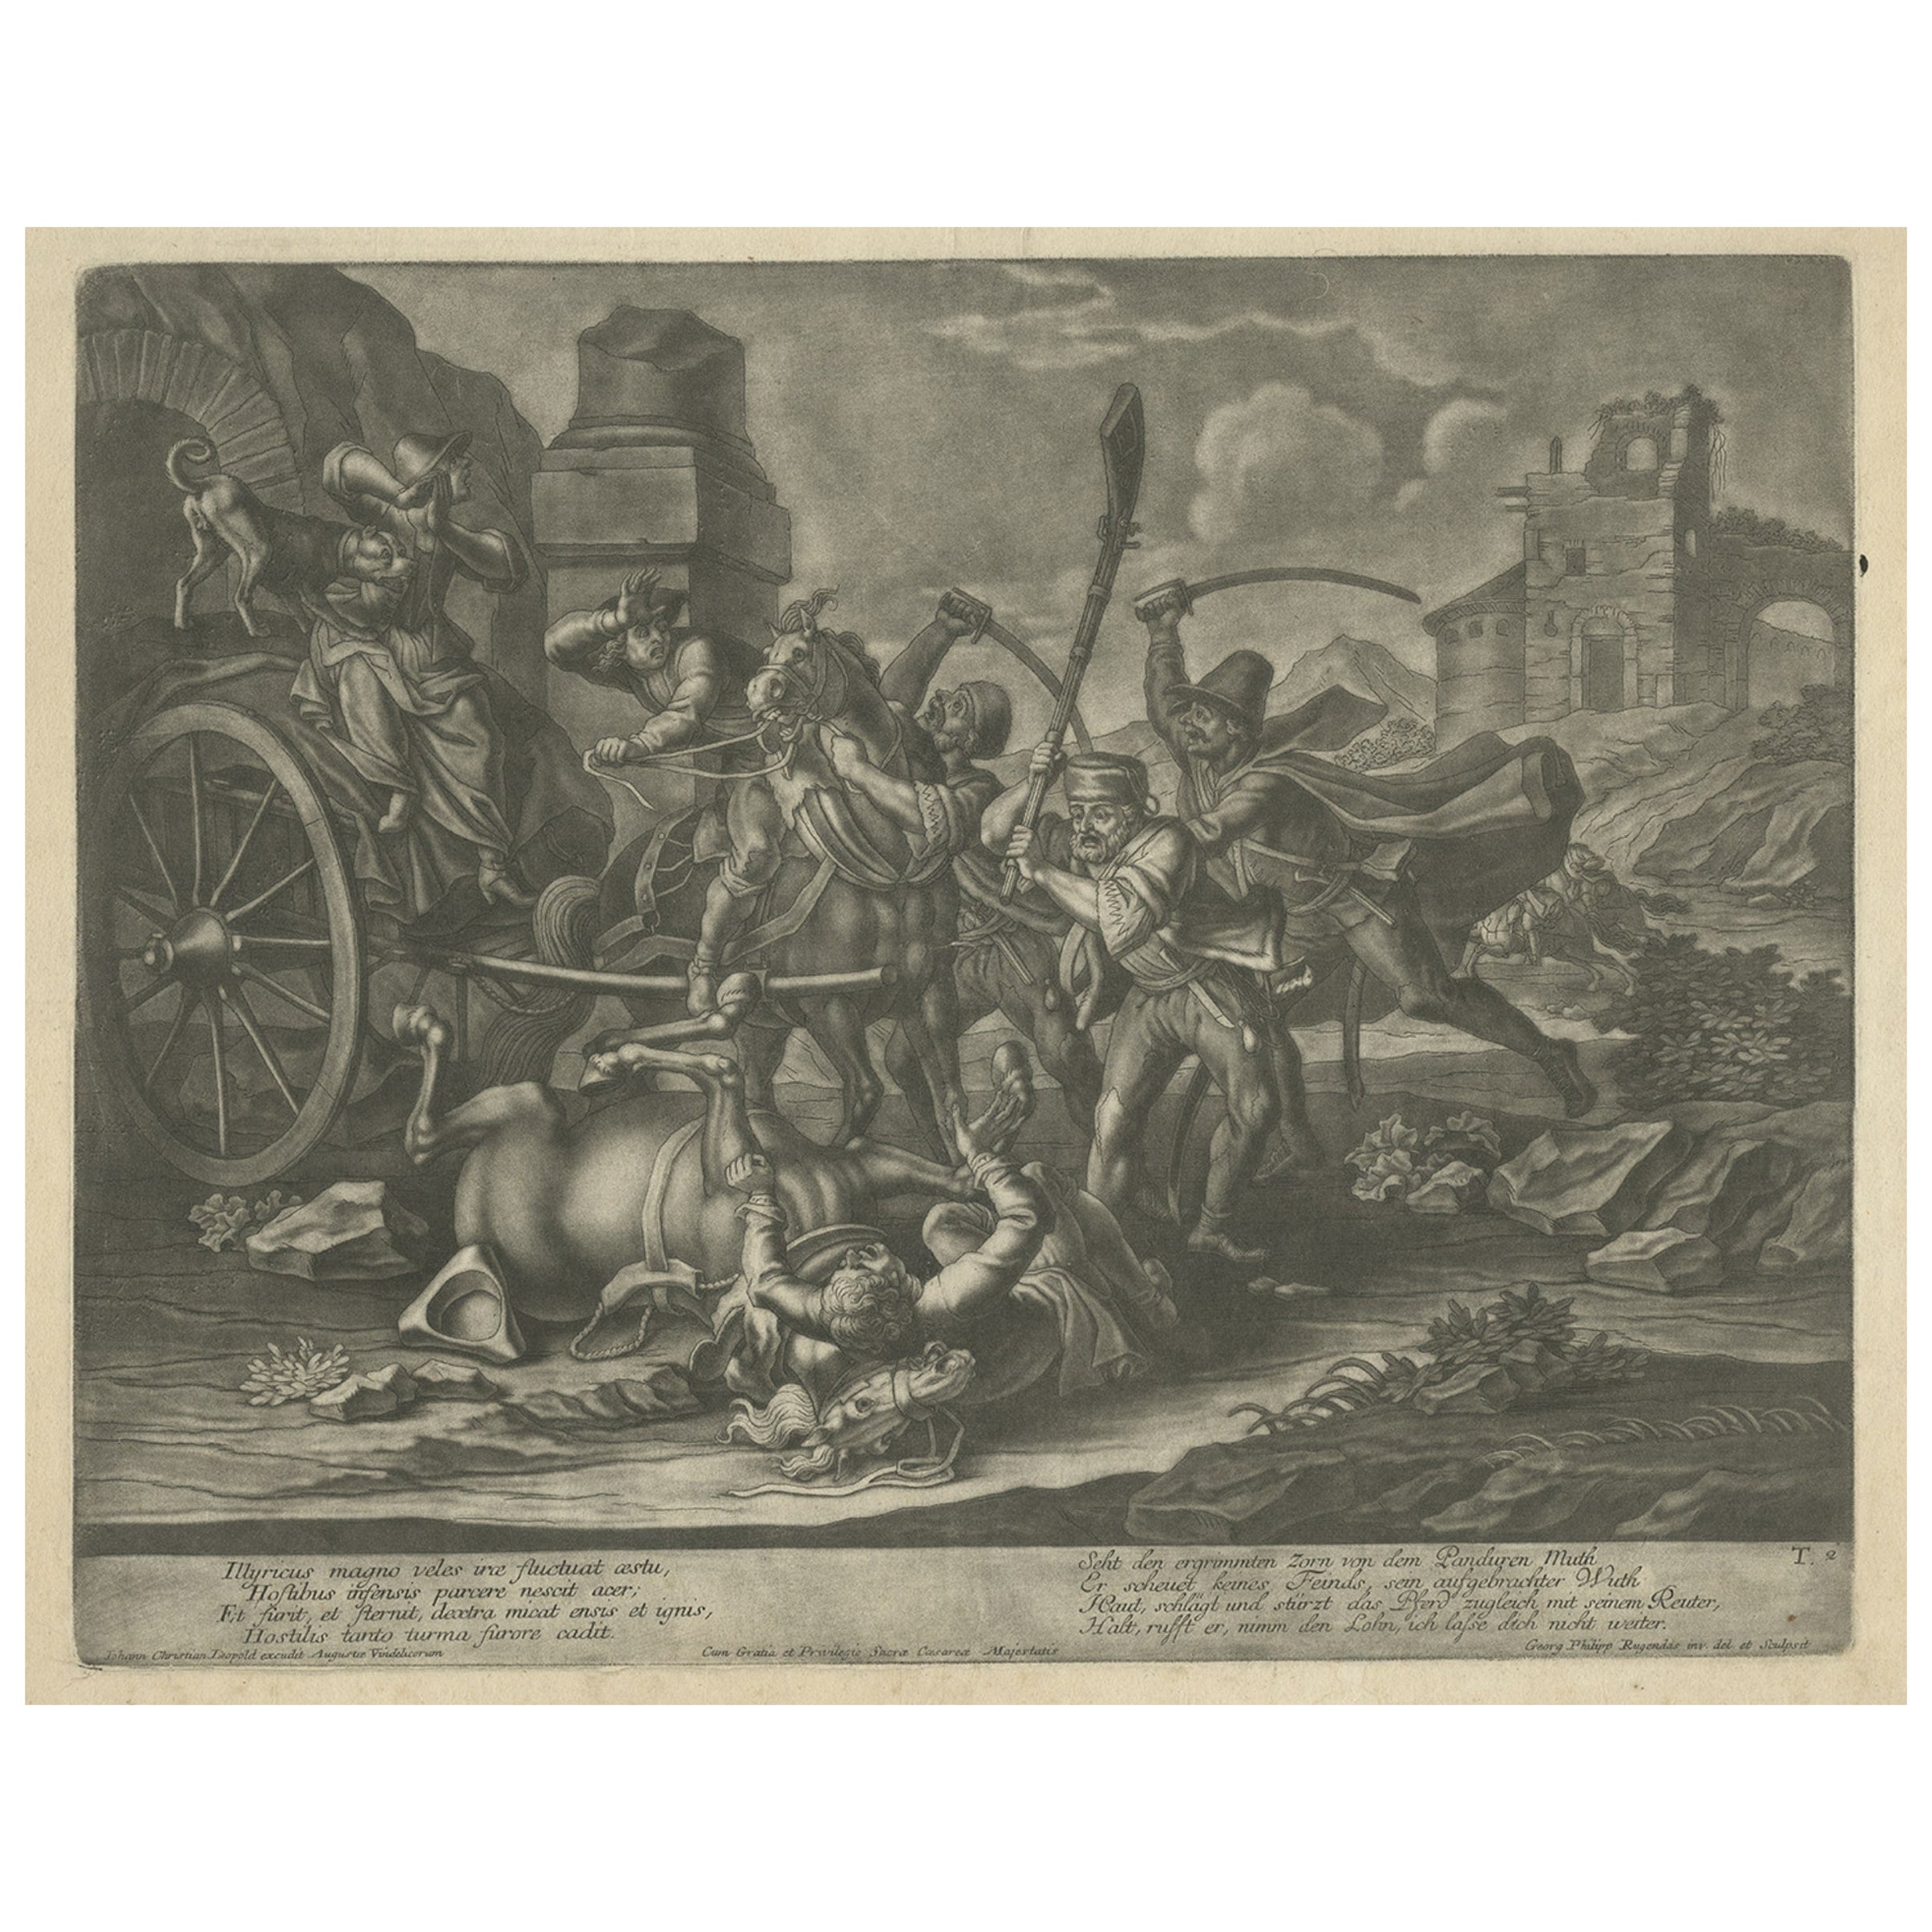 Antique Print of Travellers being robbed by Bandits, c.1745